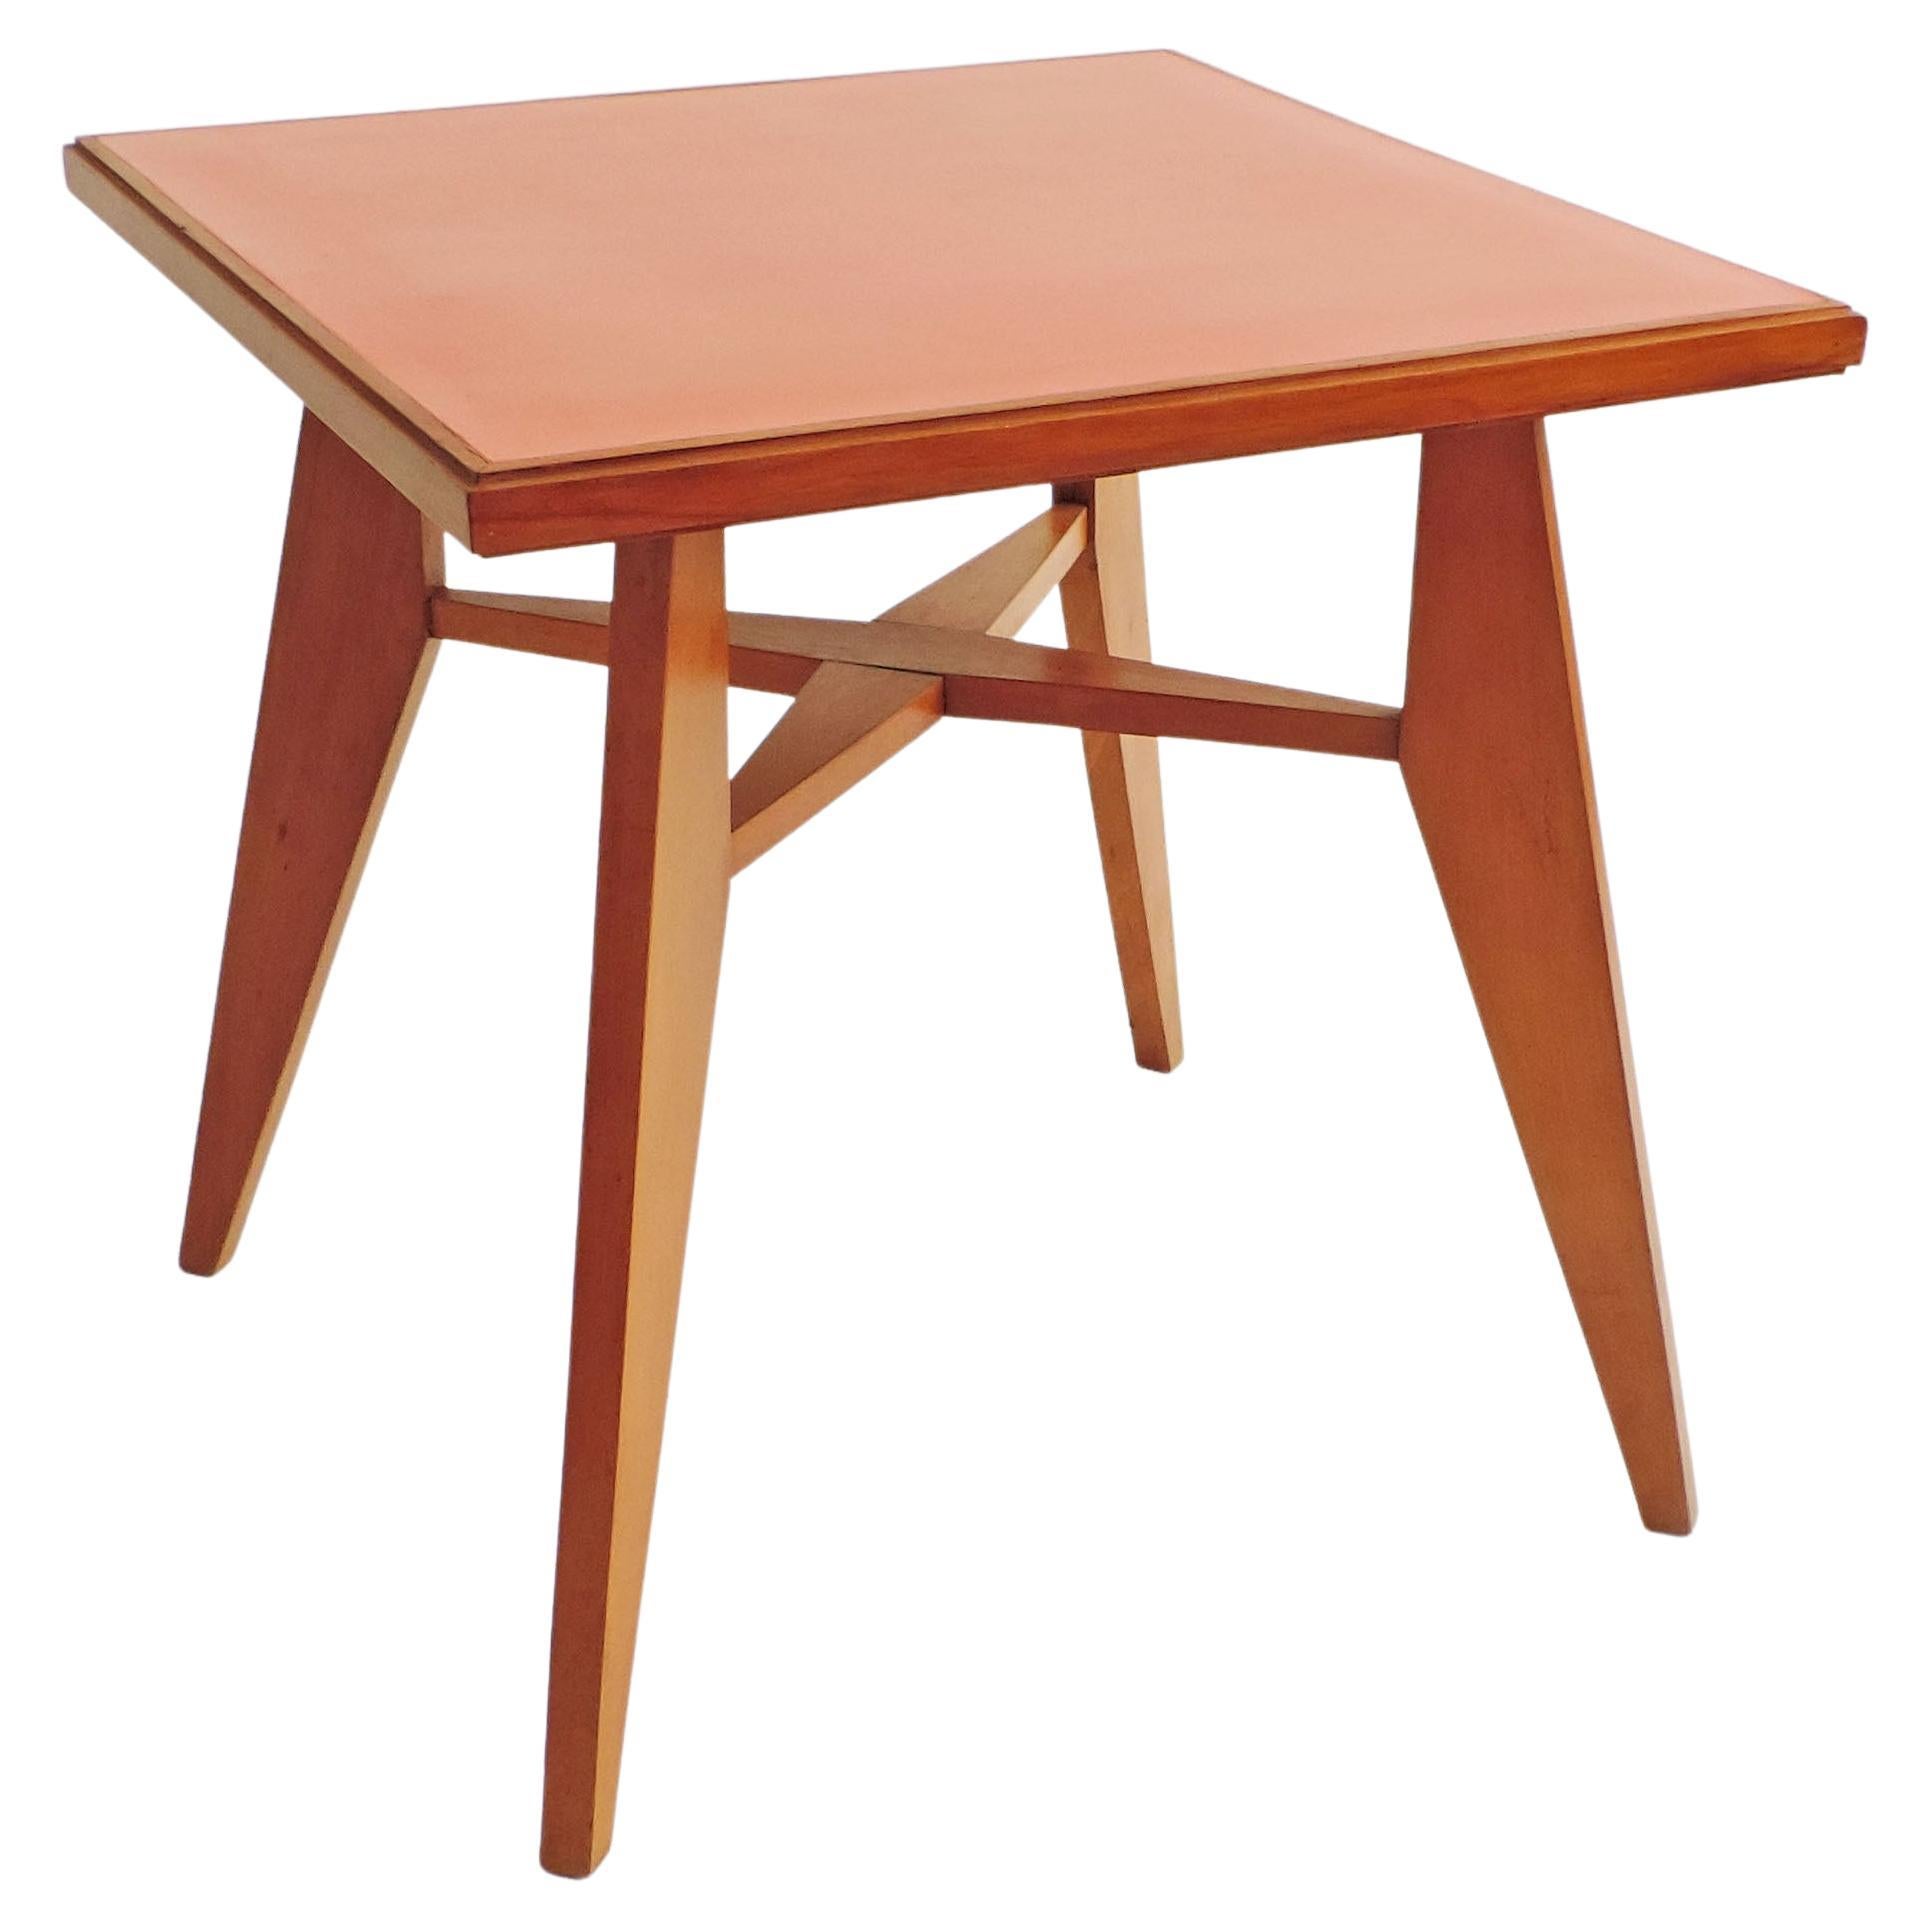 Architectural Square Dining Table with Red Top, Italy, 1950s